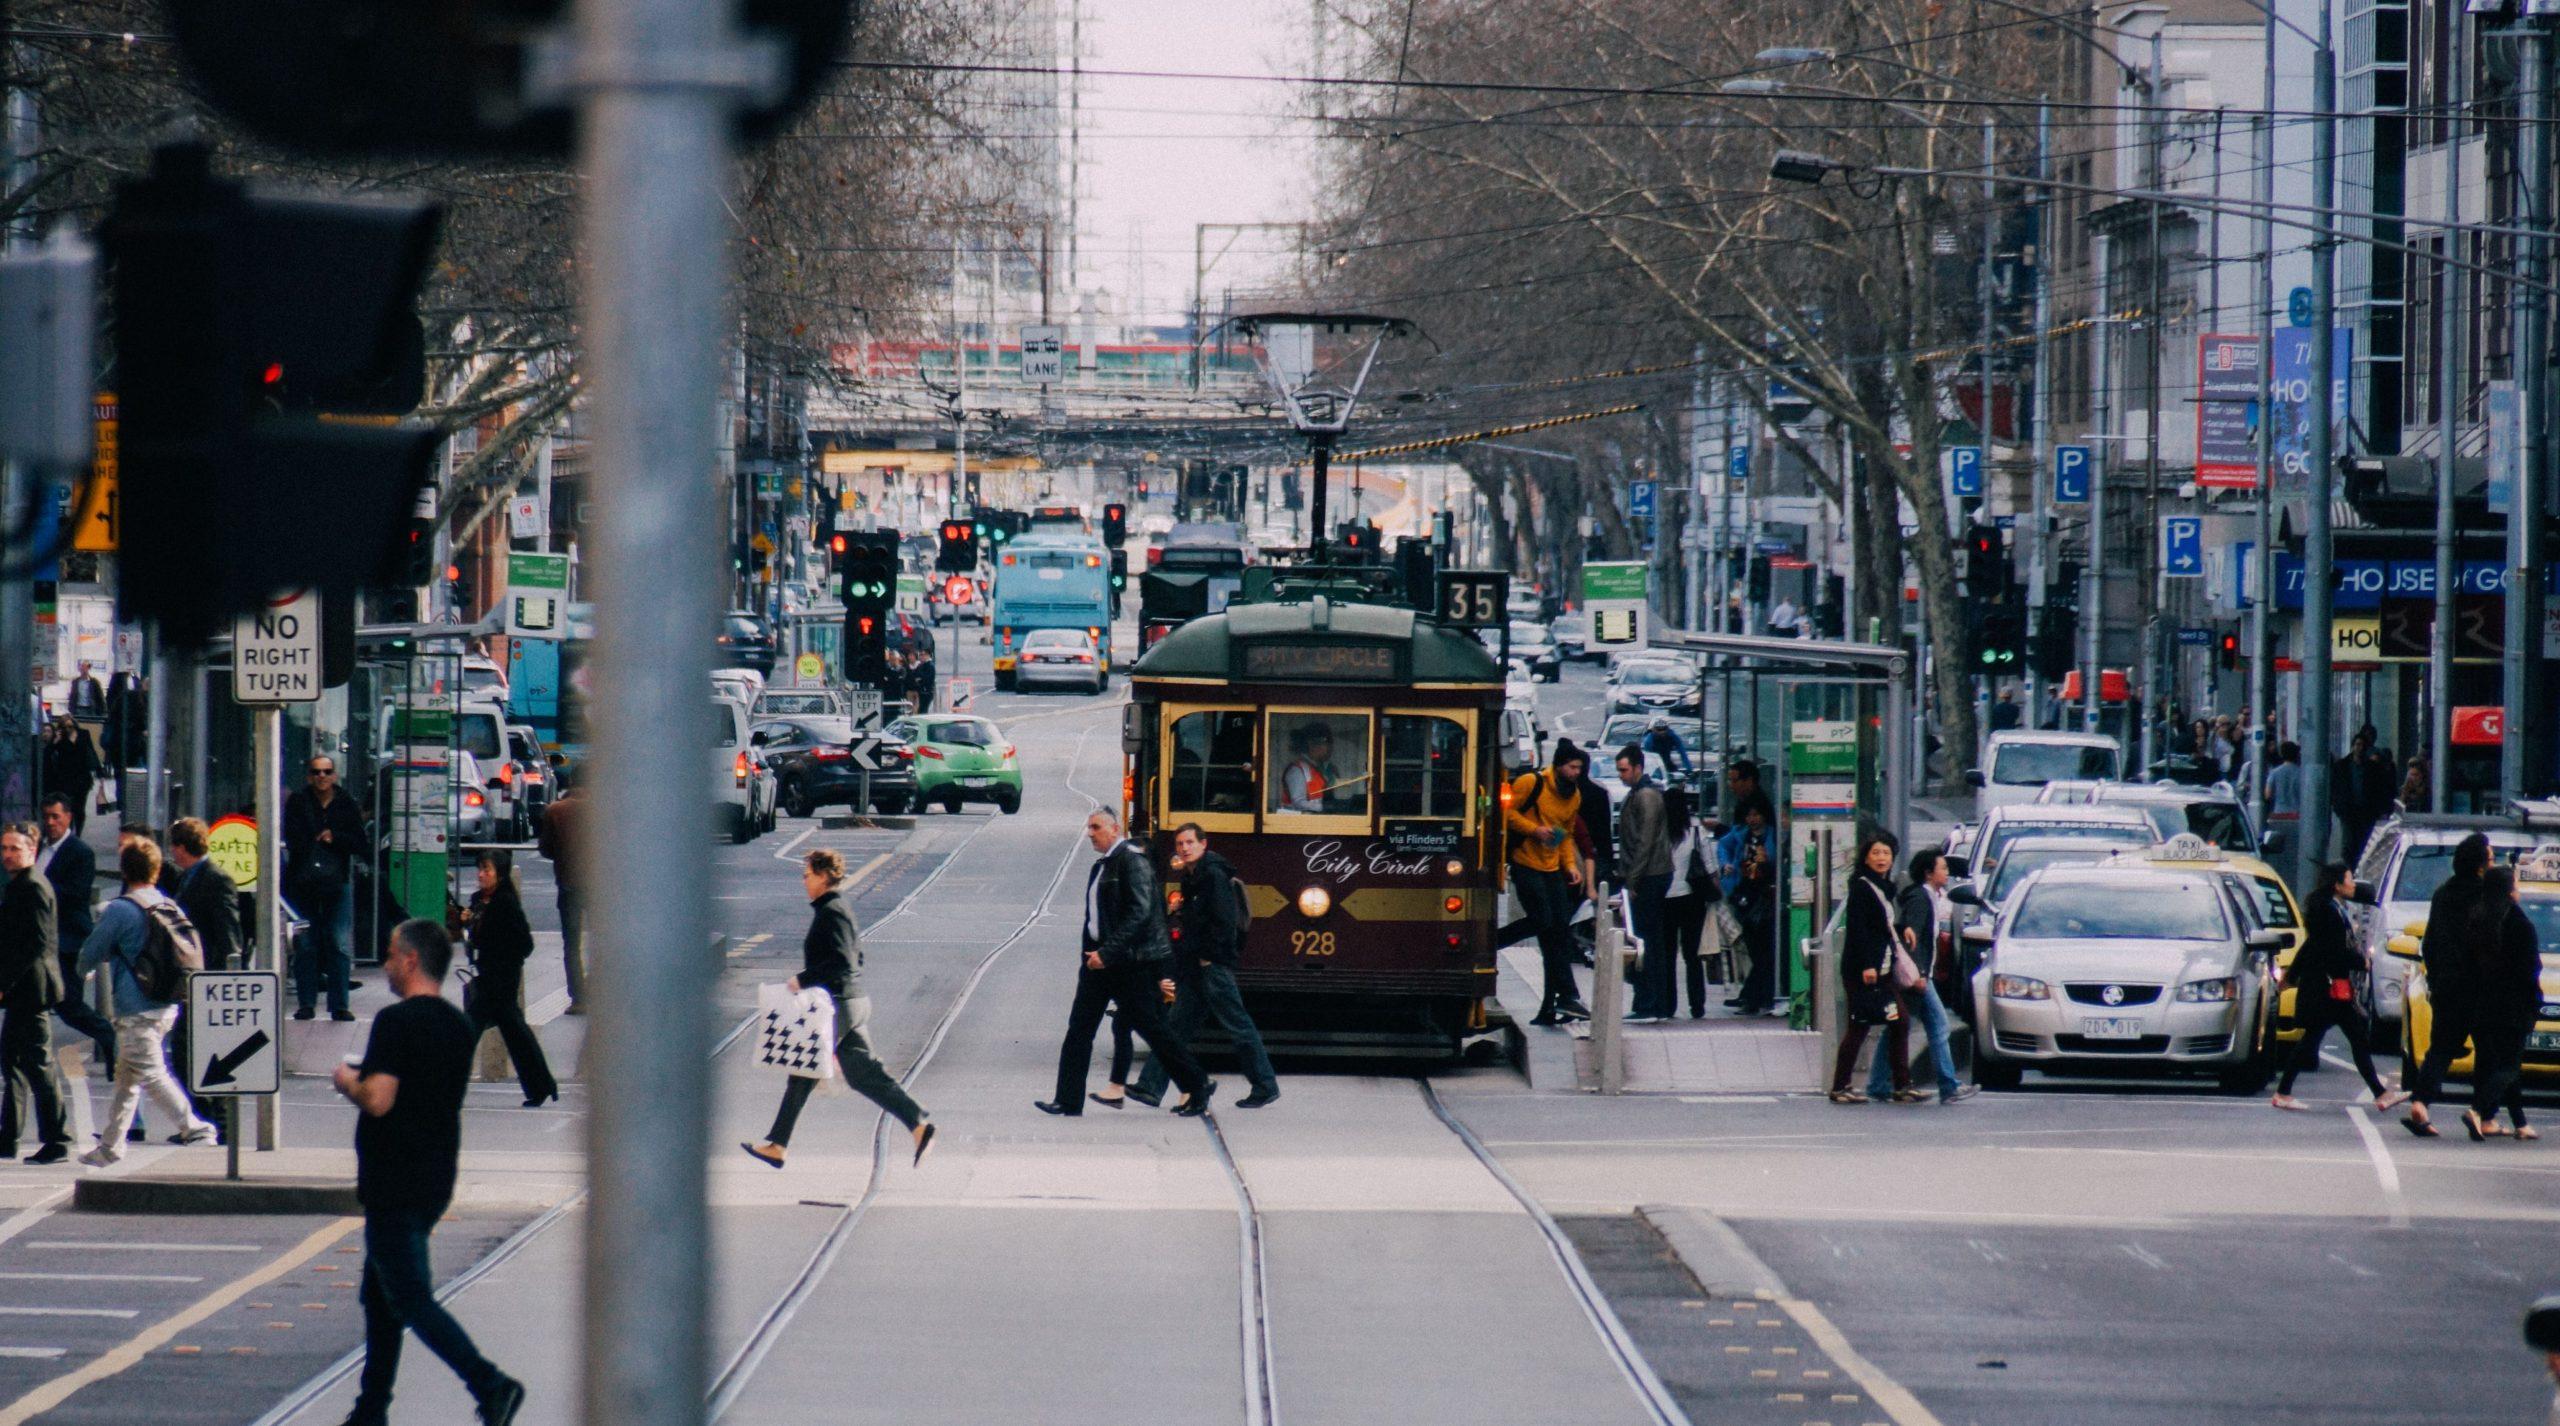 Busy Melbourne street featuring a City Circle tram.